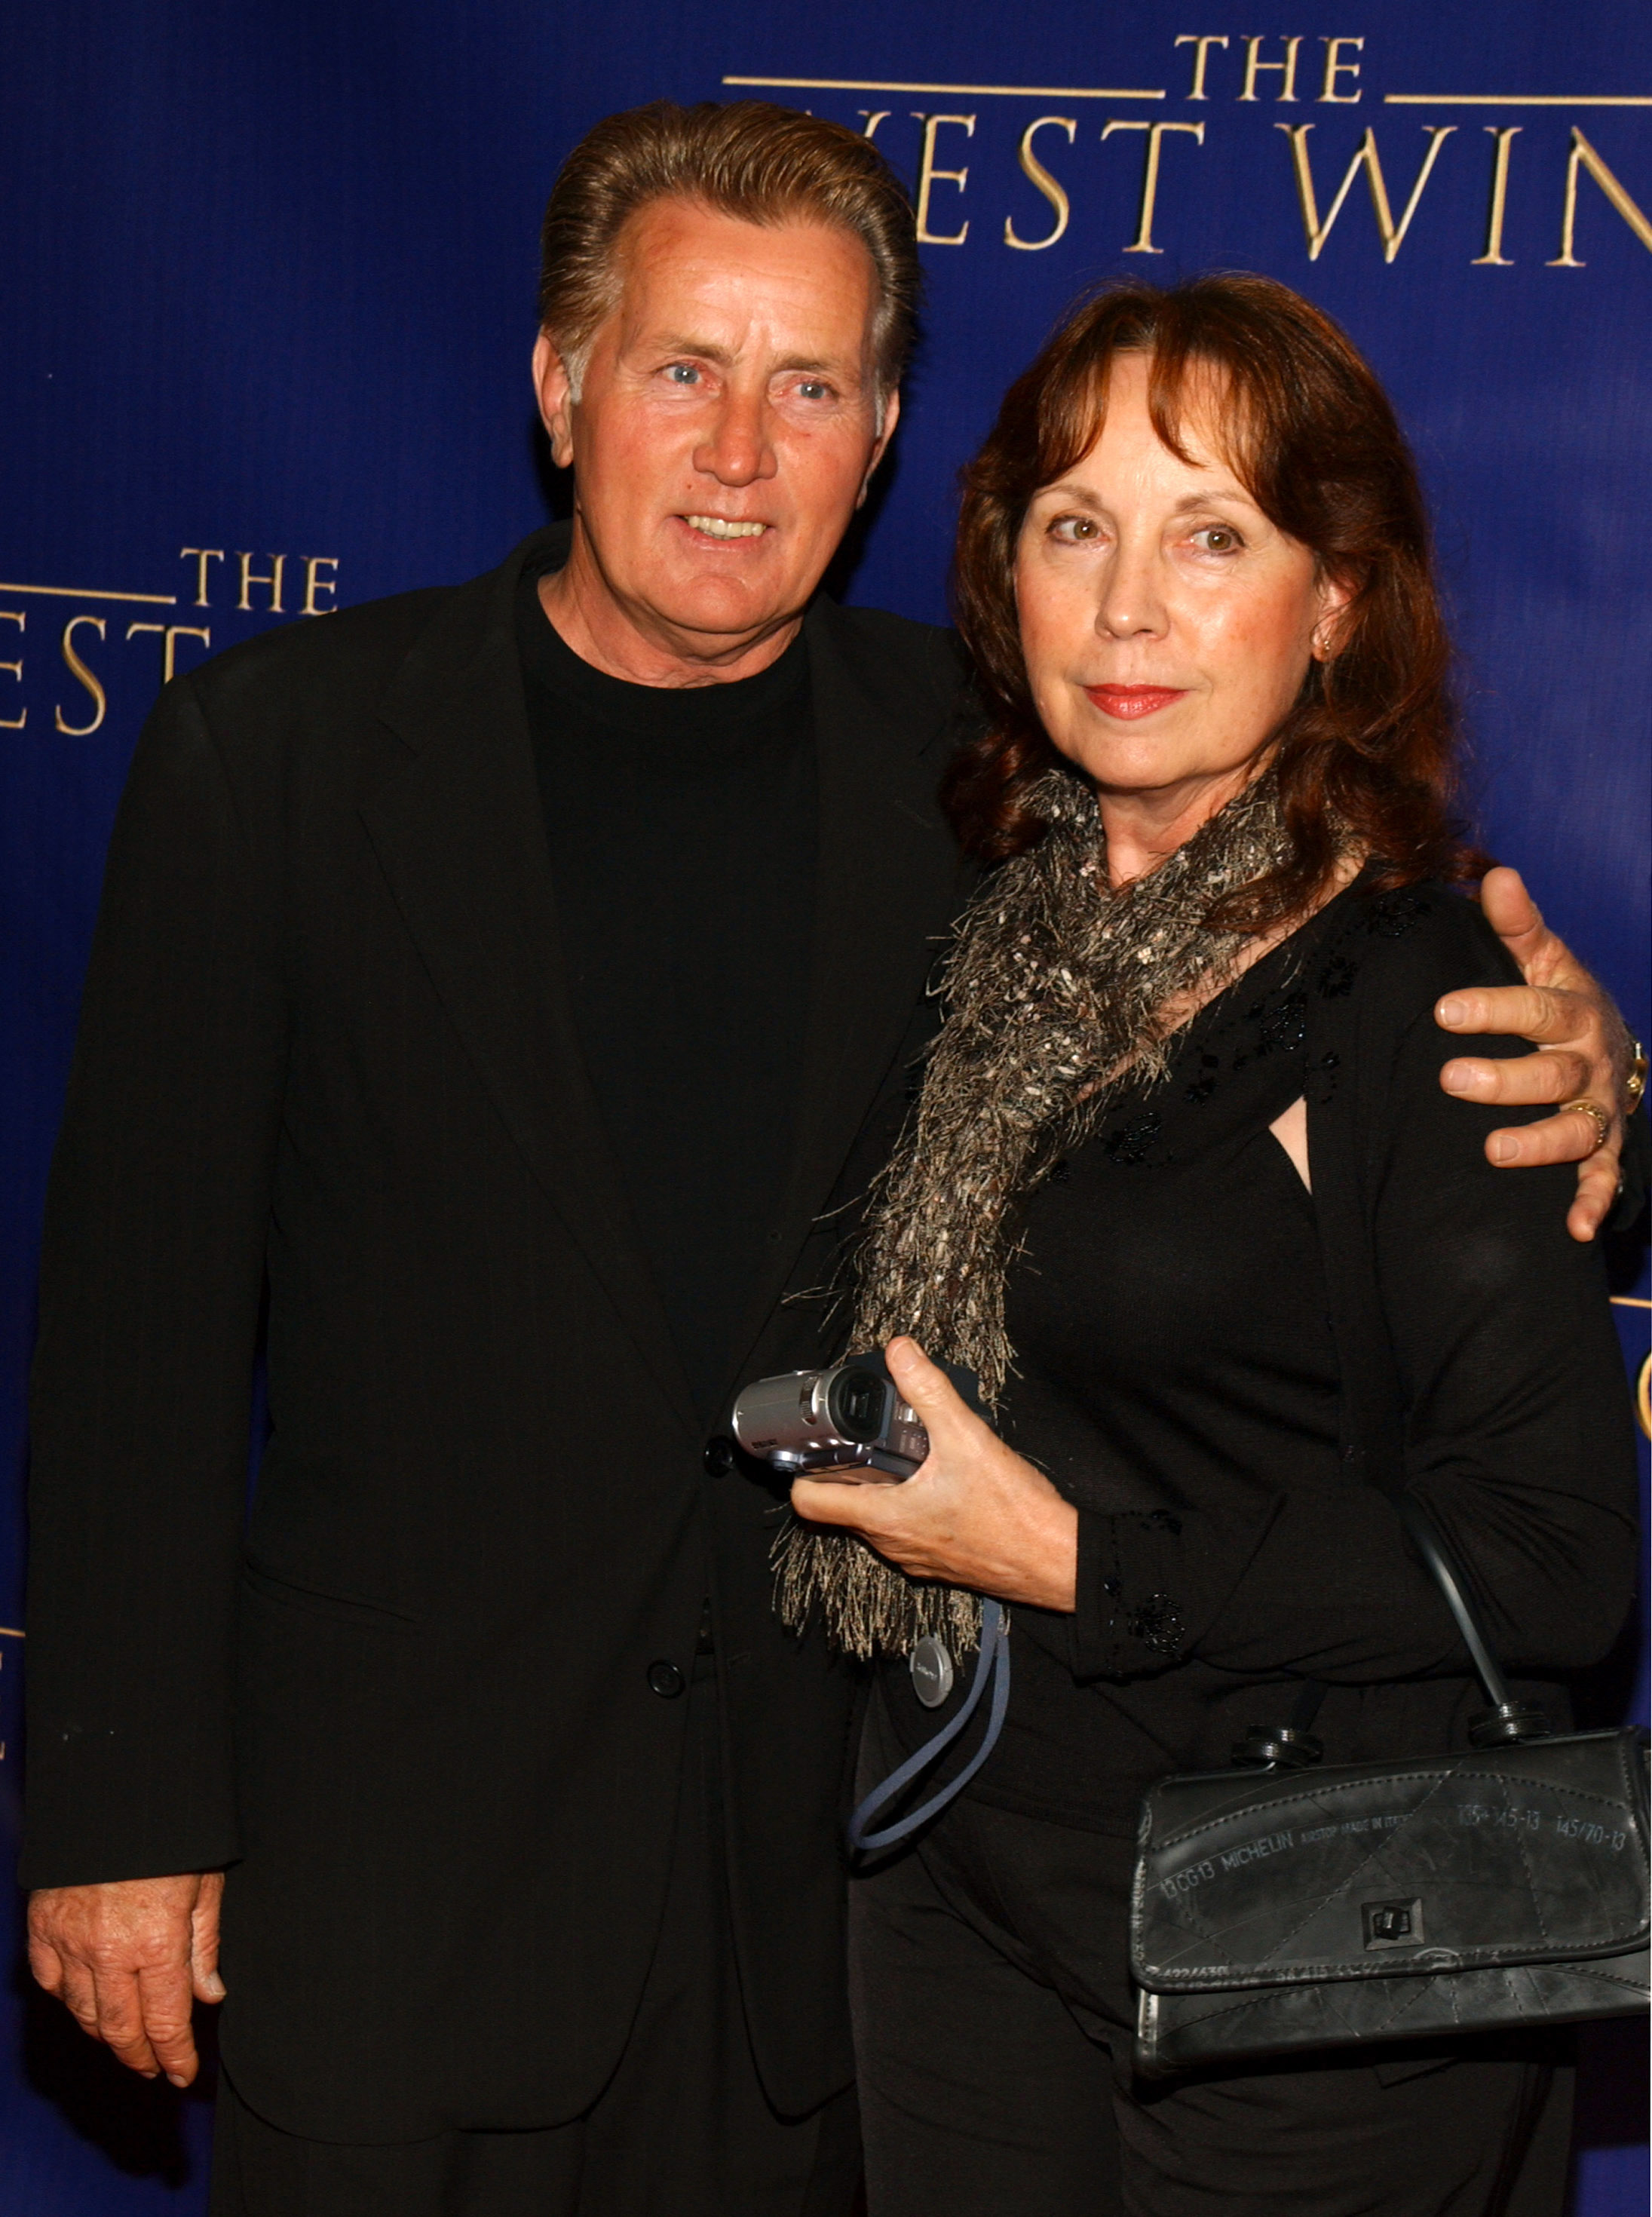 Martin Sheen and his wife Janet Sheen pictured during "The West Wing" 100th Episode Celebration at Four Seasons Hotel on November 2, 2003 in Los Angeles, California | Source: Getty Images